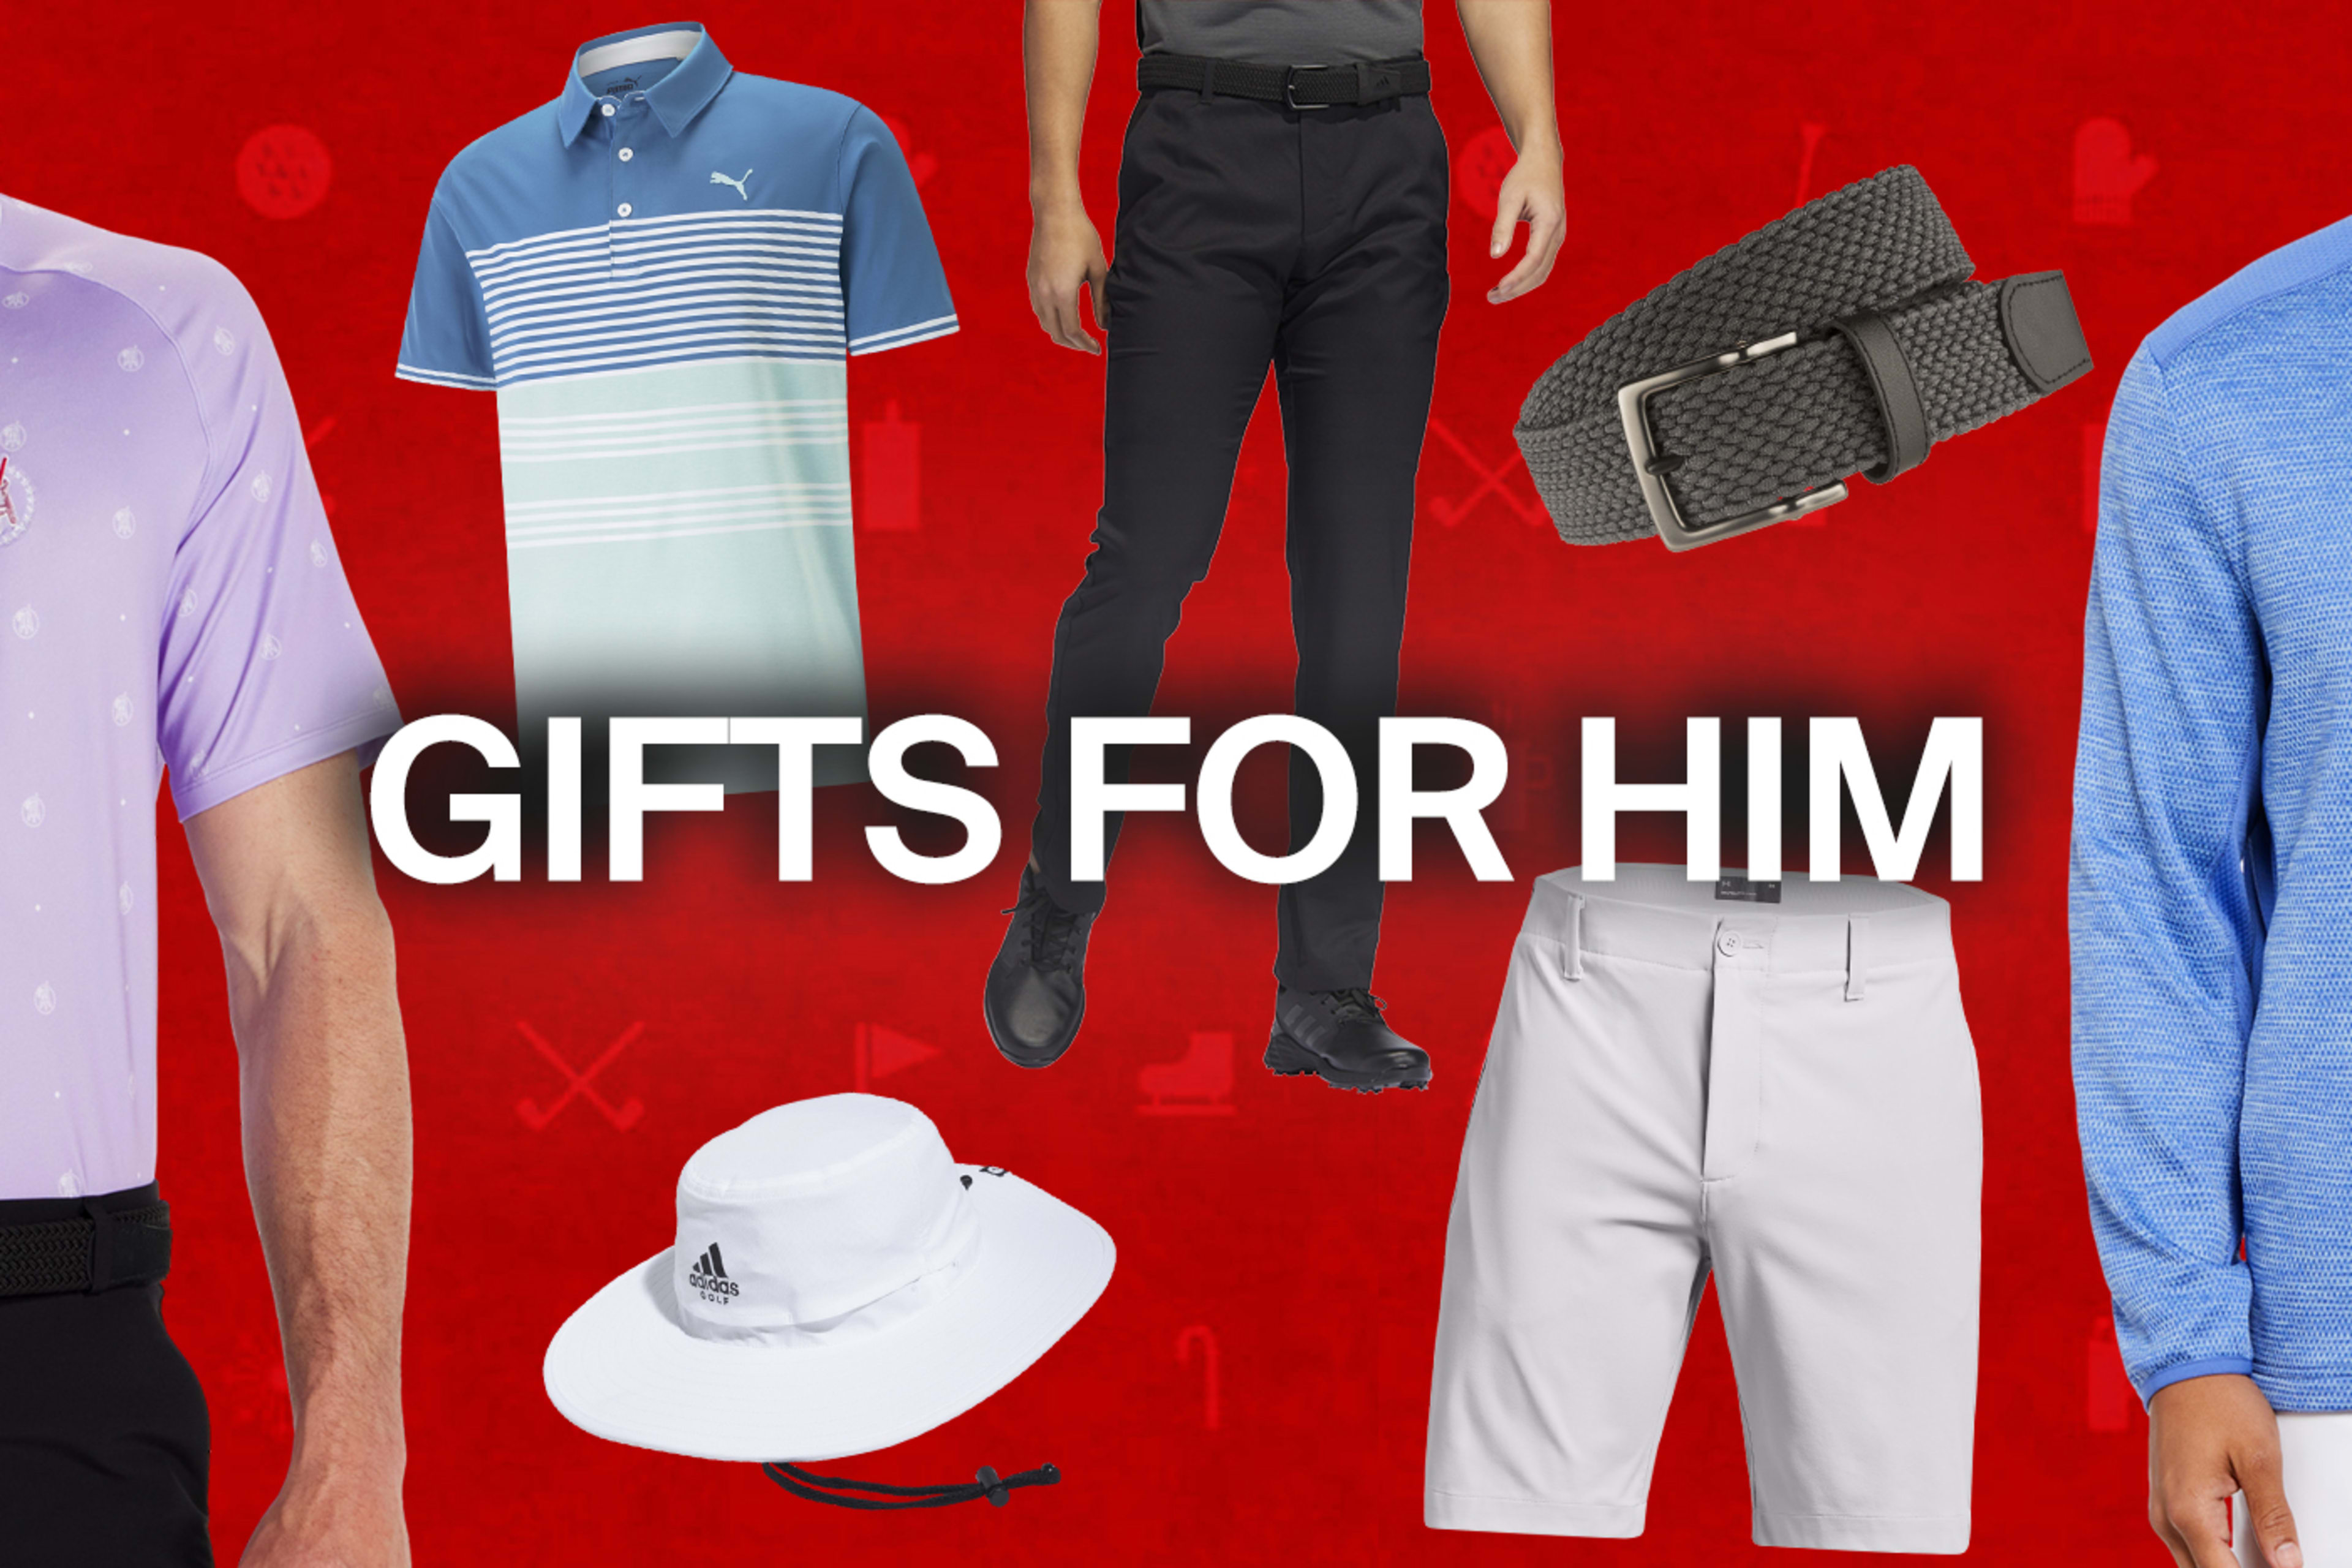 Surprise a golf fanatic with some top-notch golf apparel